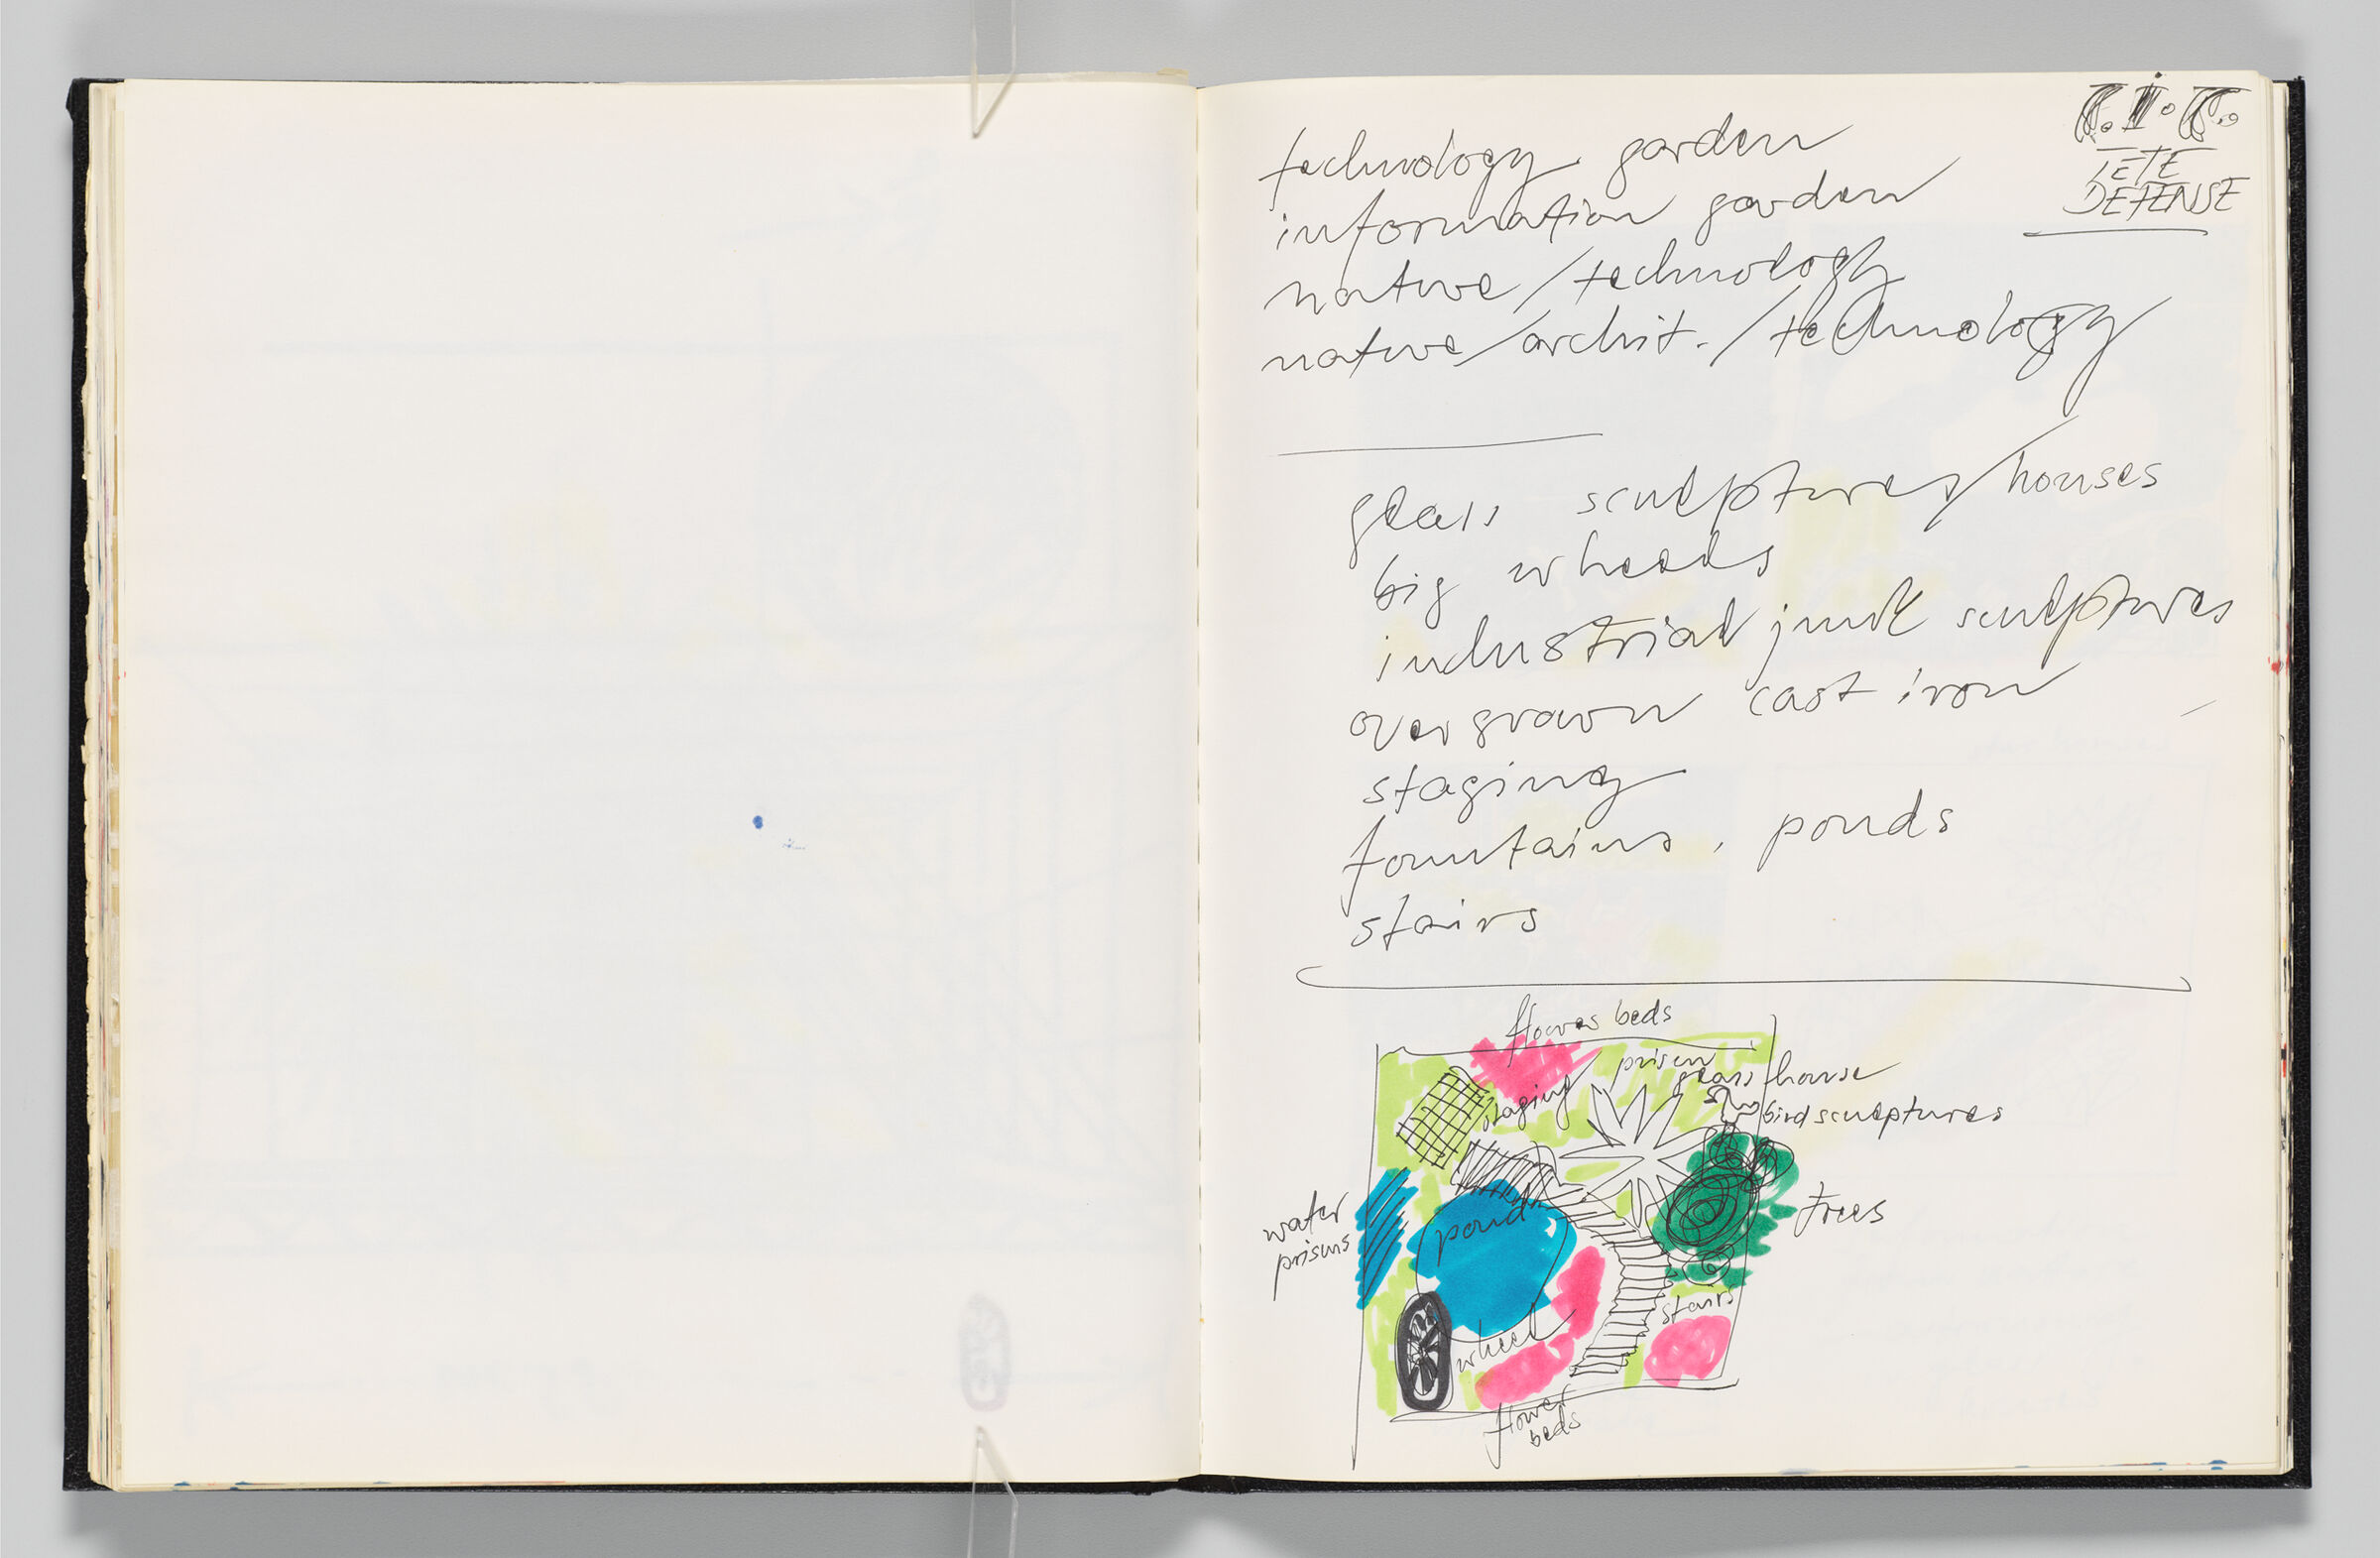 Untitled (Blank With Faint Color Transfer, Left Page); Untitled (Notes And Plan For Garden Installation, Right Page)